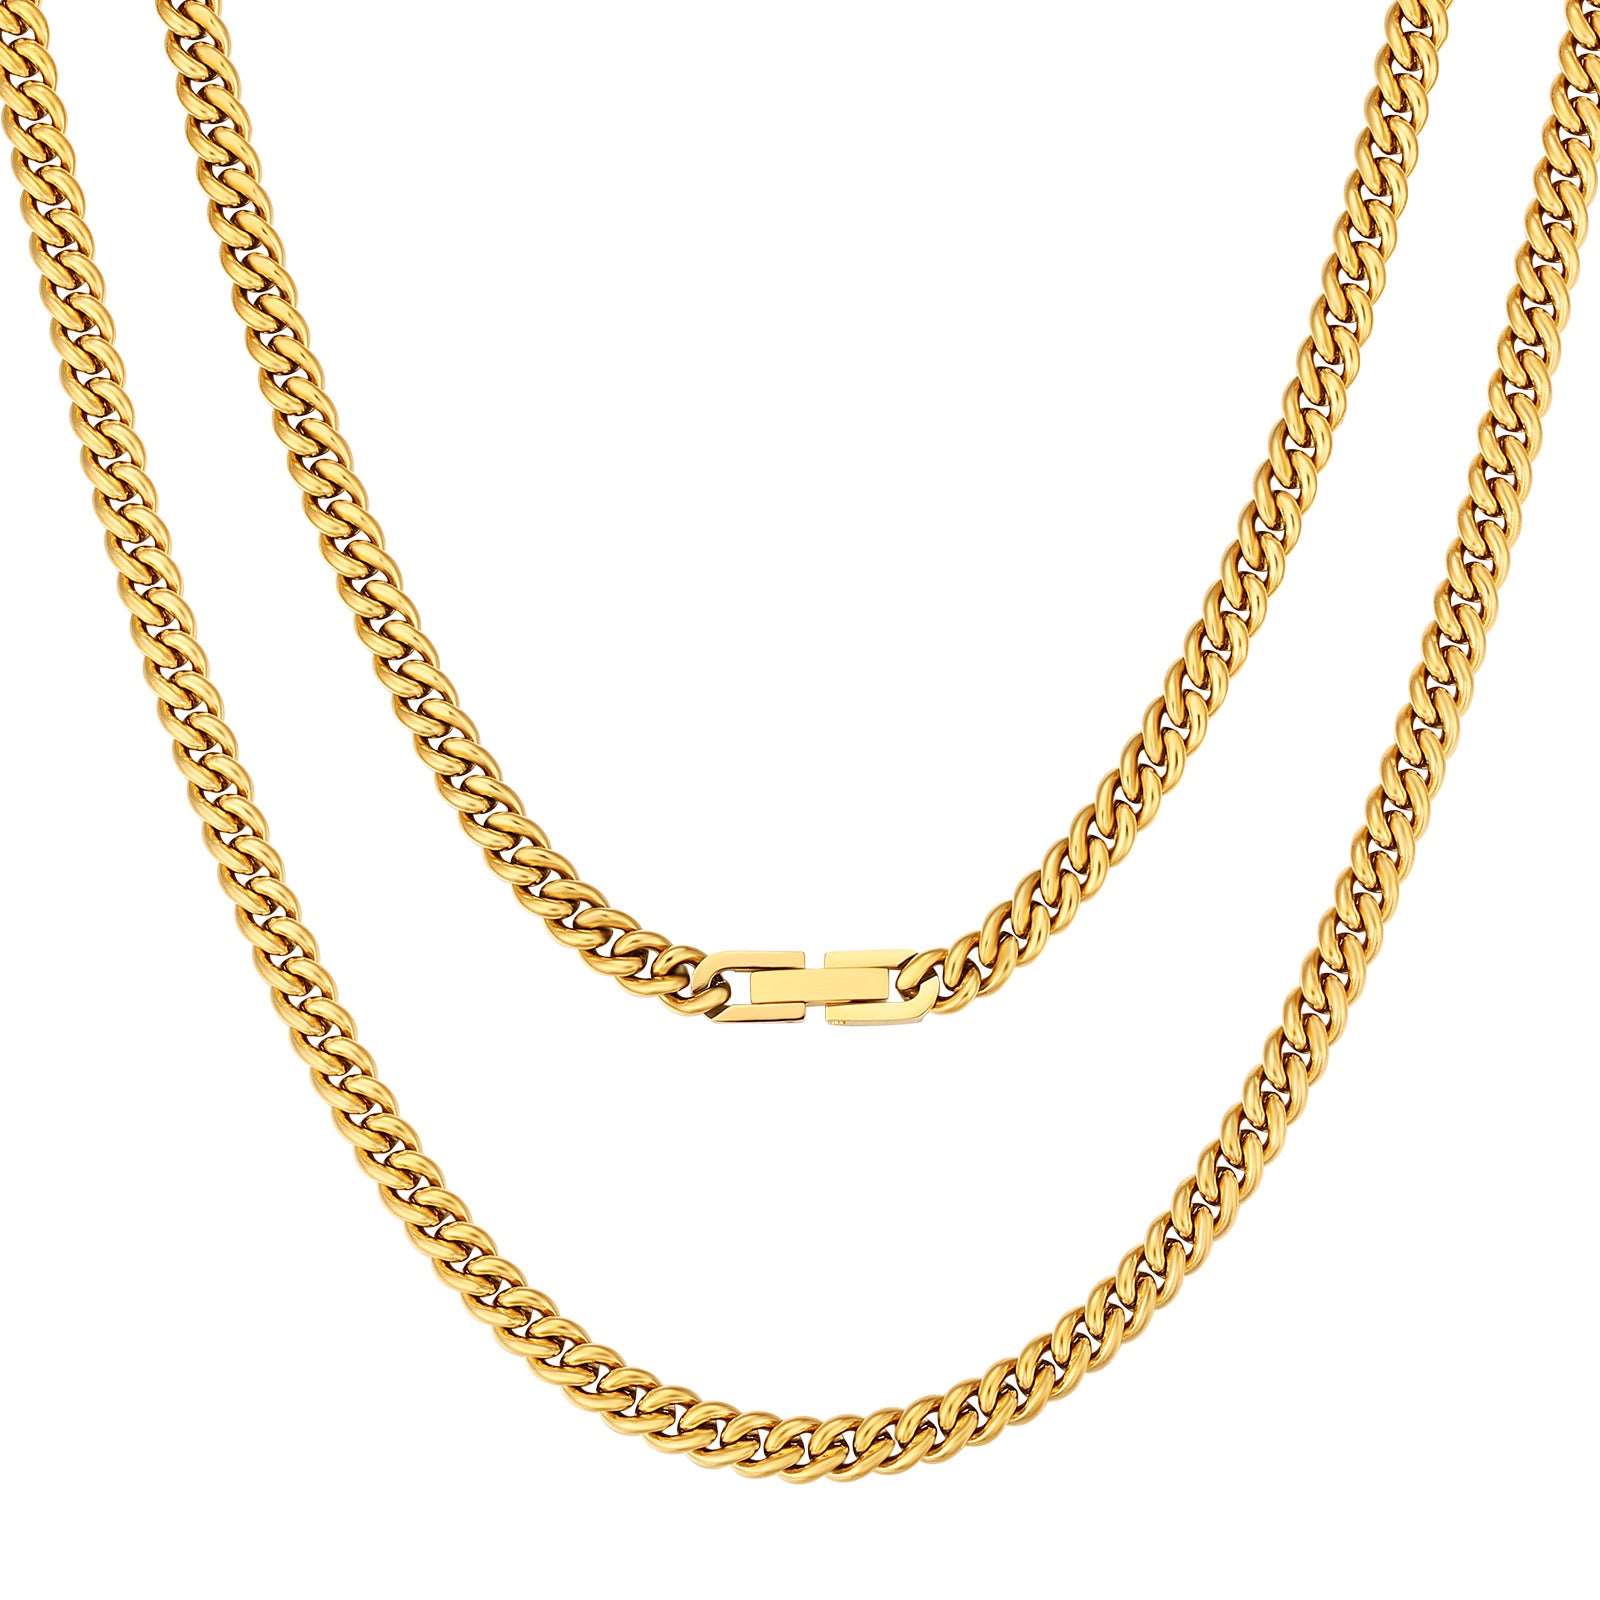 316 Titanium Stainless Steel 5mm Cuban Chain in 18K Gold or Platinum Silver Various Lengths